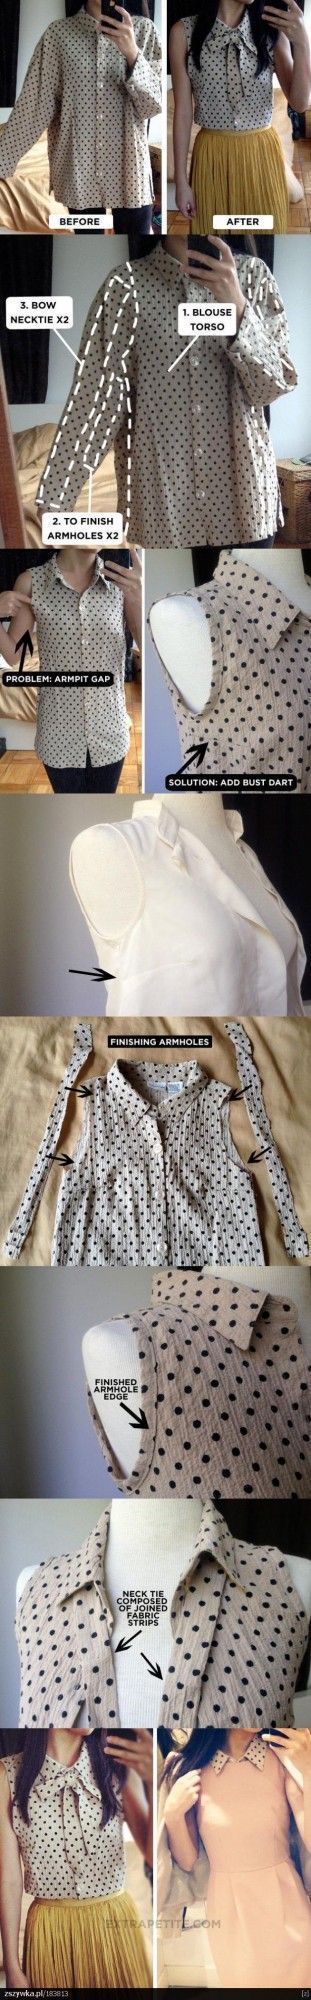 24 Stylish DIY Clothing Tutorials…tailoring a thrift store shirt to fit well